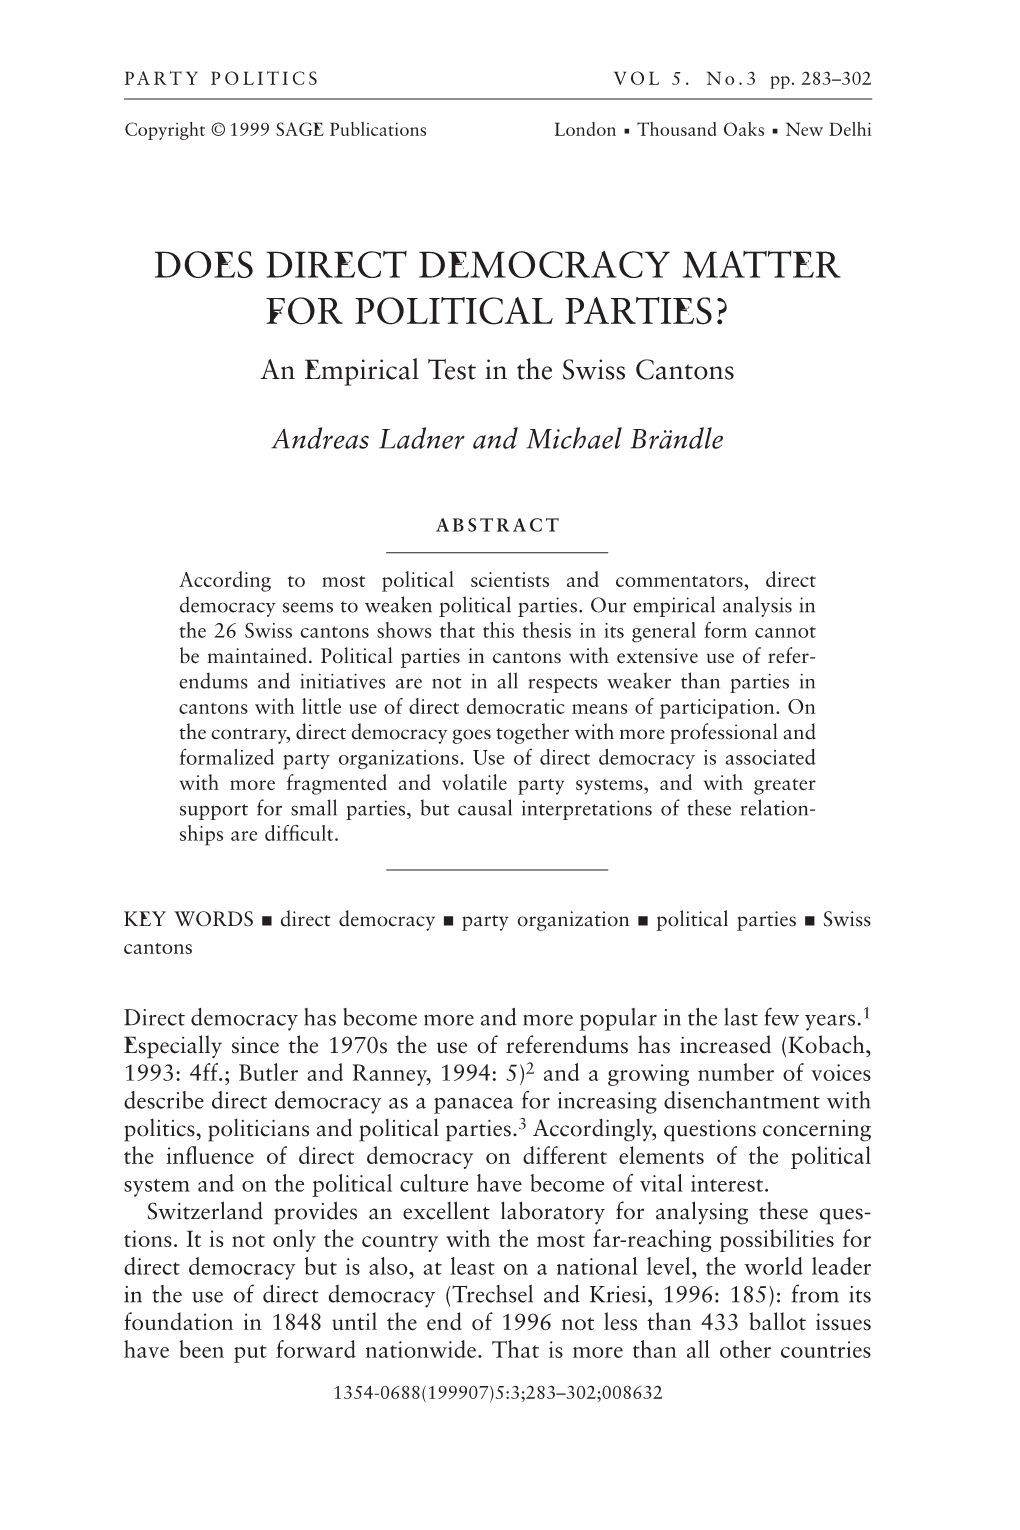 DOES DIRECT DEMOCRACY MATTER for POLITICAL PARTIES? an Empirical Test in the Swiss Cantons